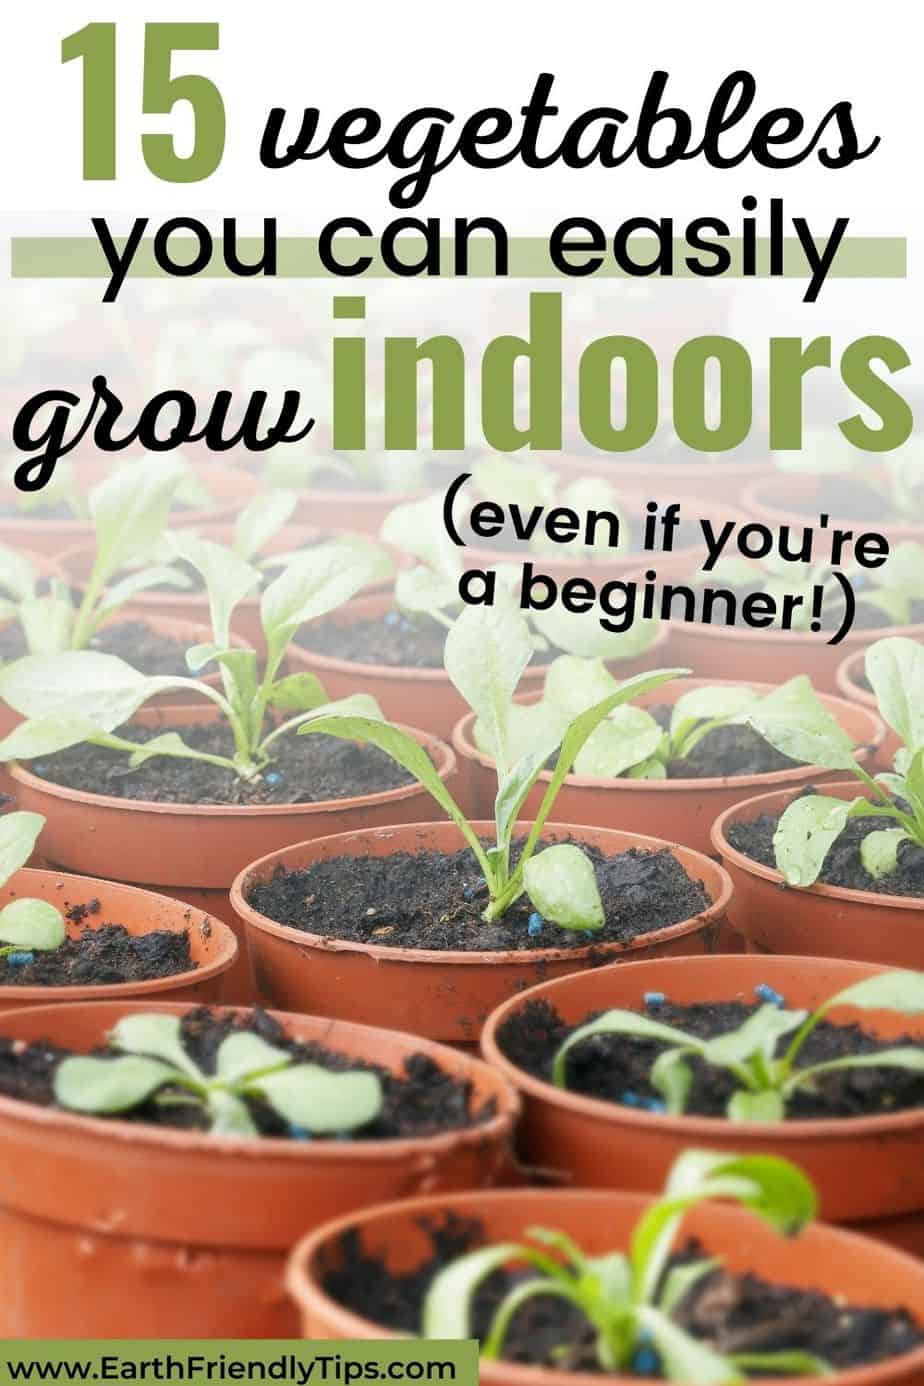 Plants in pots text overlay 15 Vegetables You Can Easily Grow Indoors